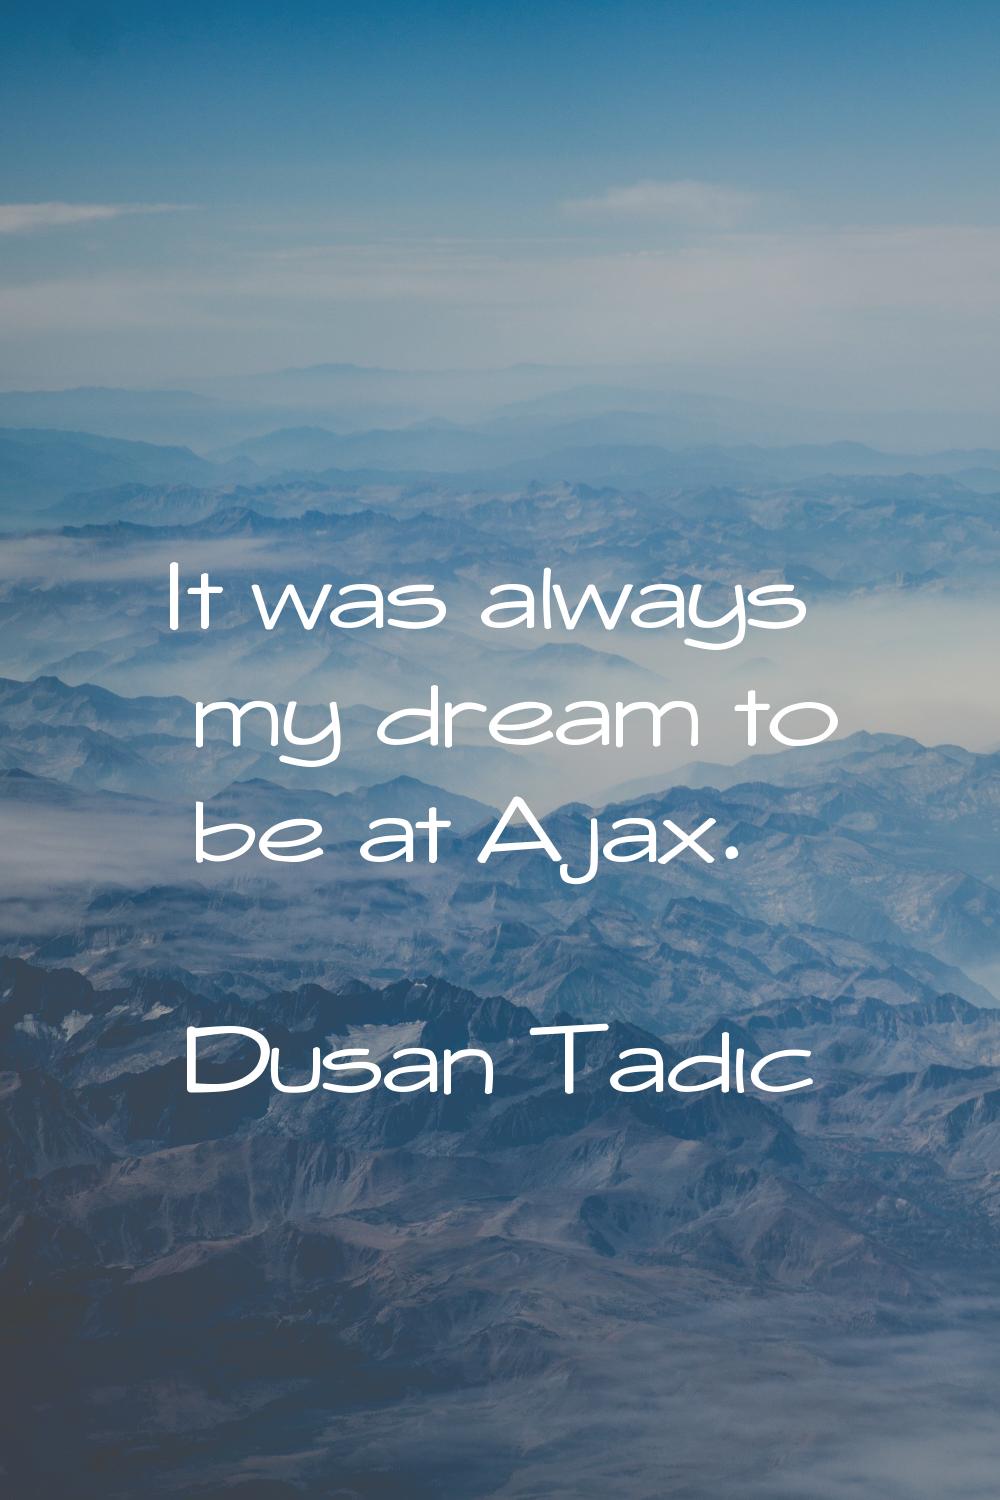 It was always my dream to be at Ajax.